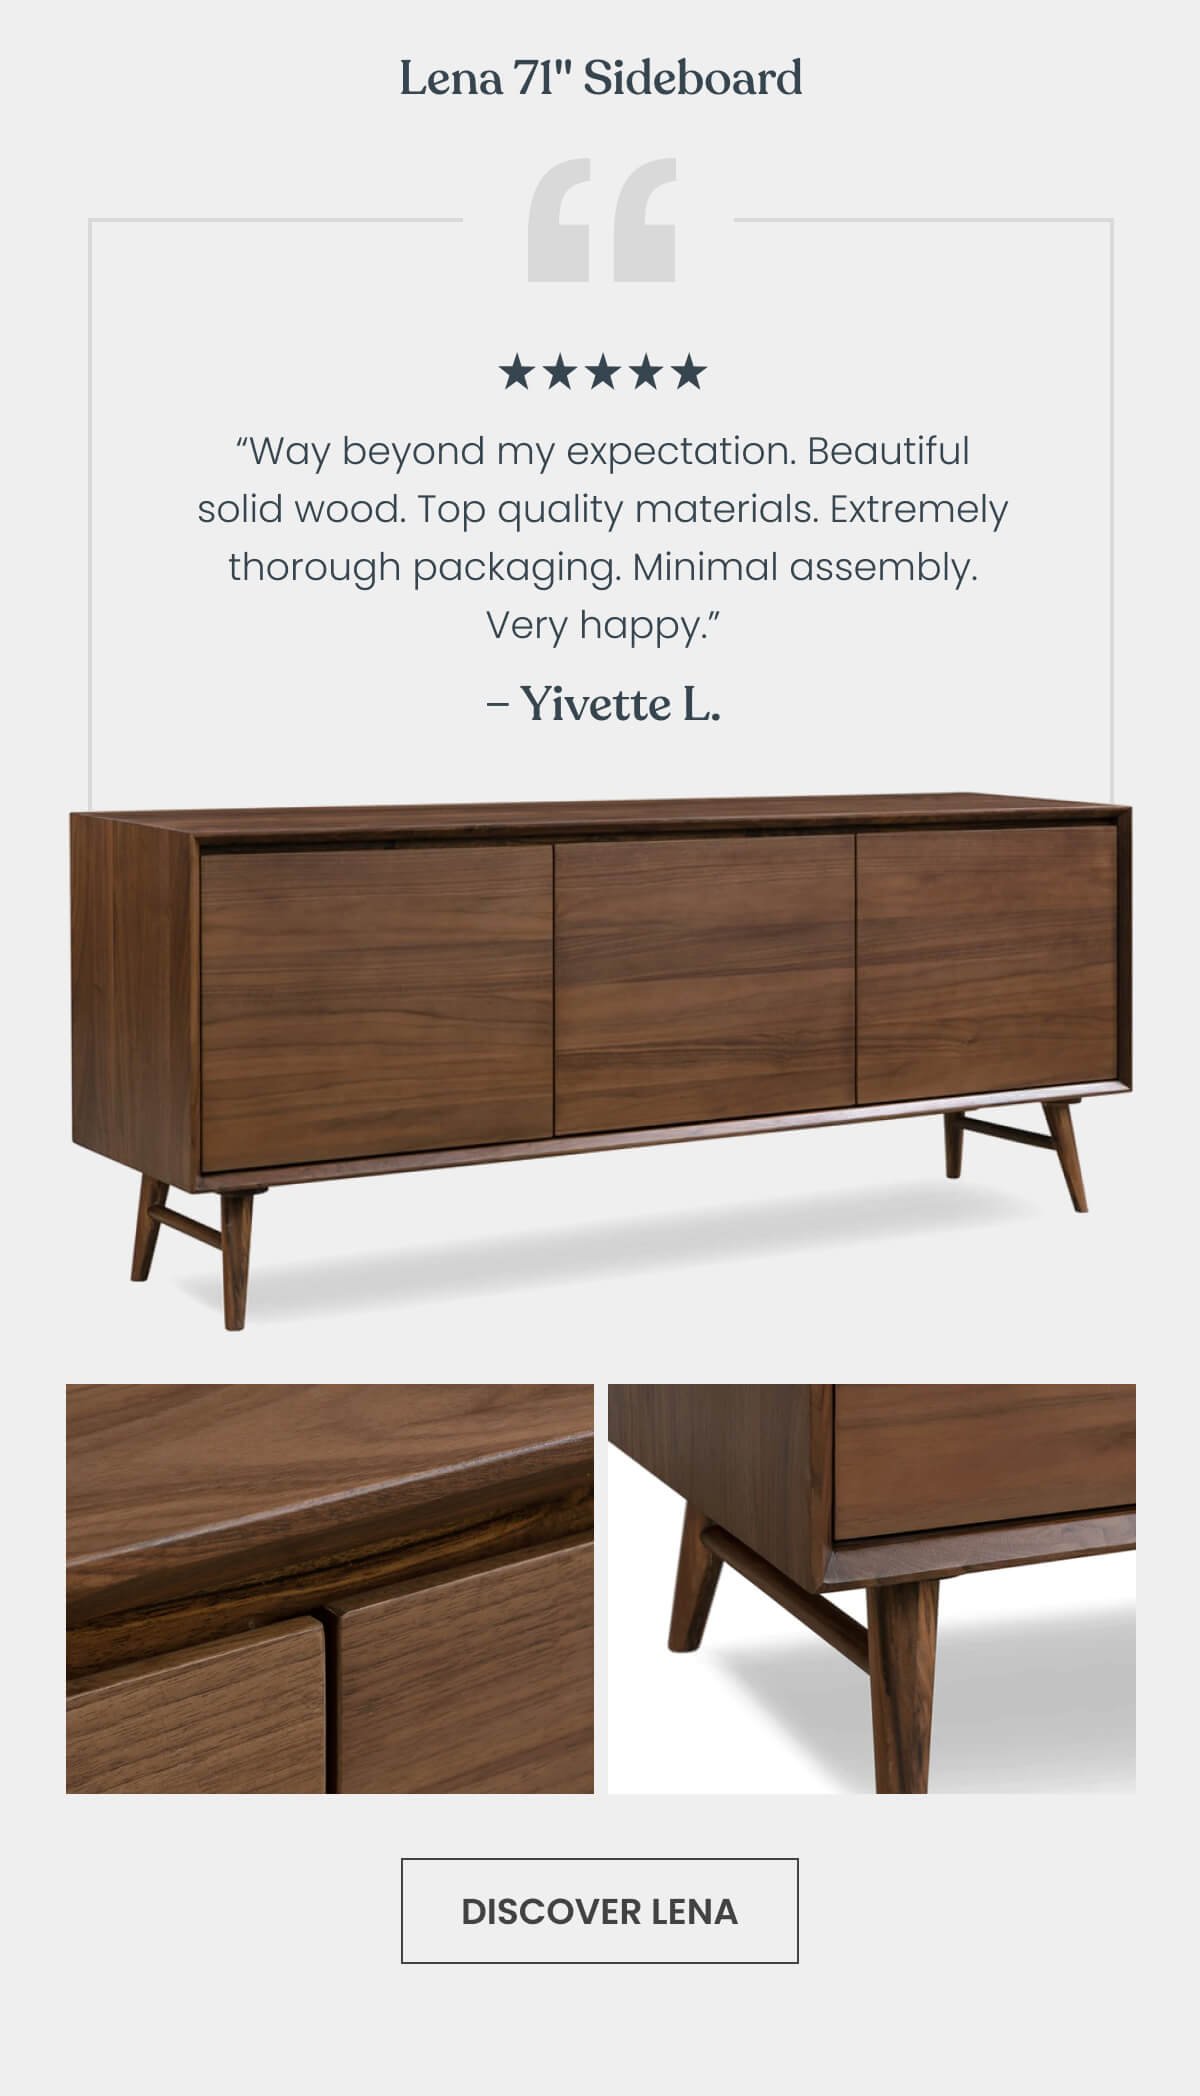 Lena 71" Sideboard “The sideboard is way beyond my expectation. Beautiful solid wood. Top build quality. Extremely thorough packaging. Minimal assembly. Yes, it is expensive, but it's not something you can buy from IKEA. Very happy.” - Yiqing ⭐⭐⭐⭐⭐ 